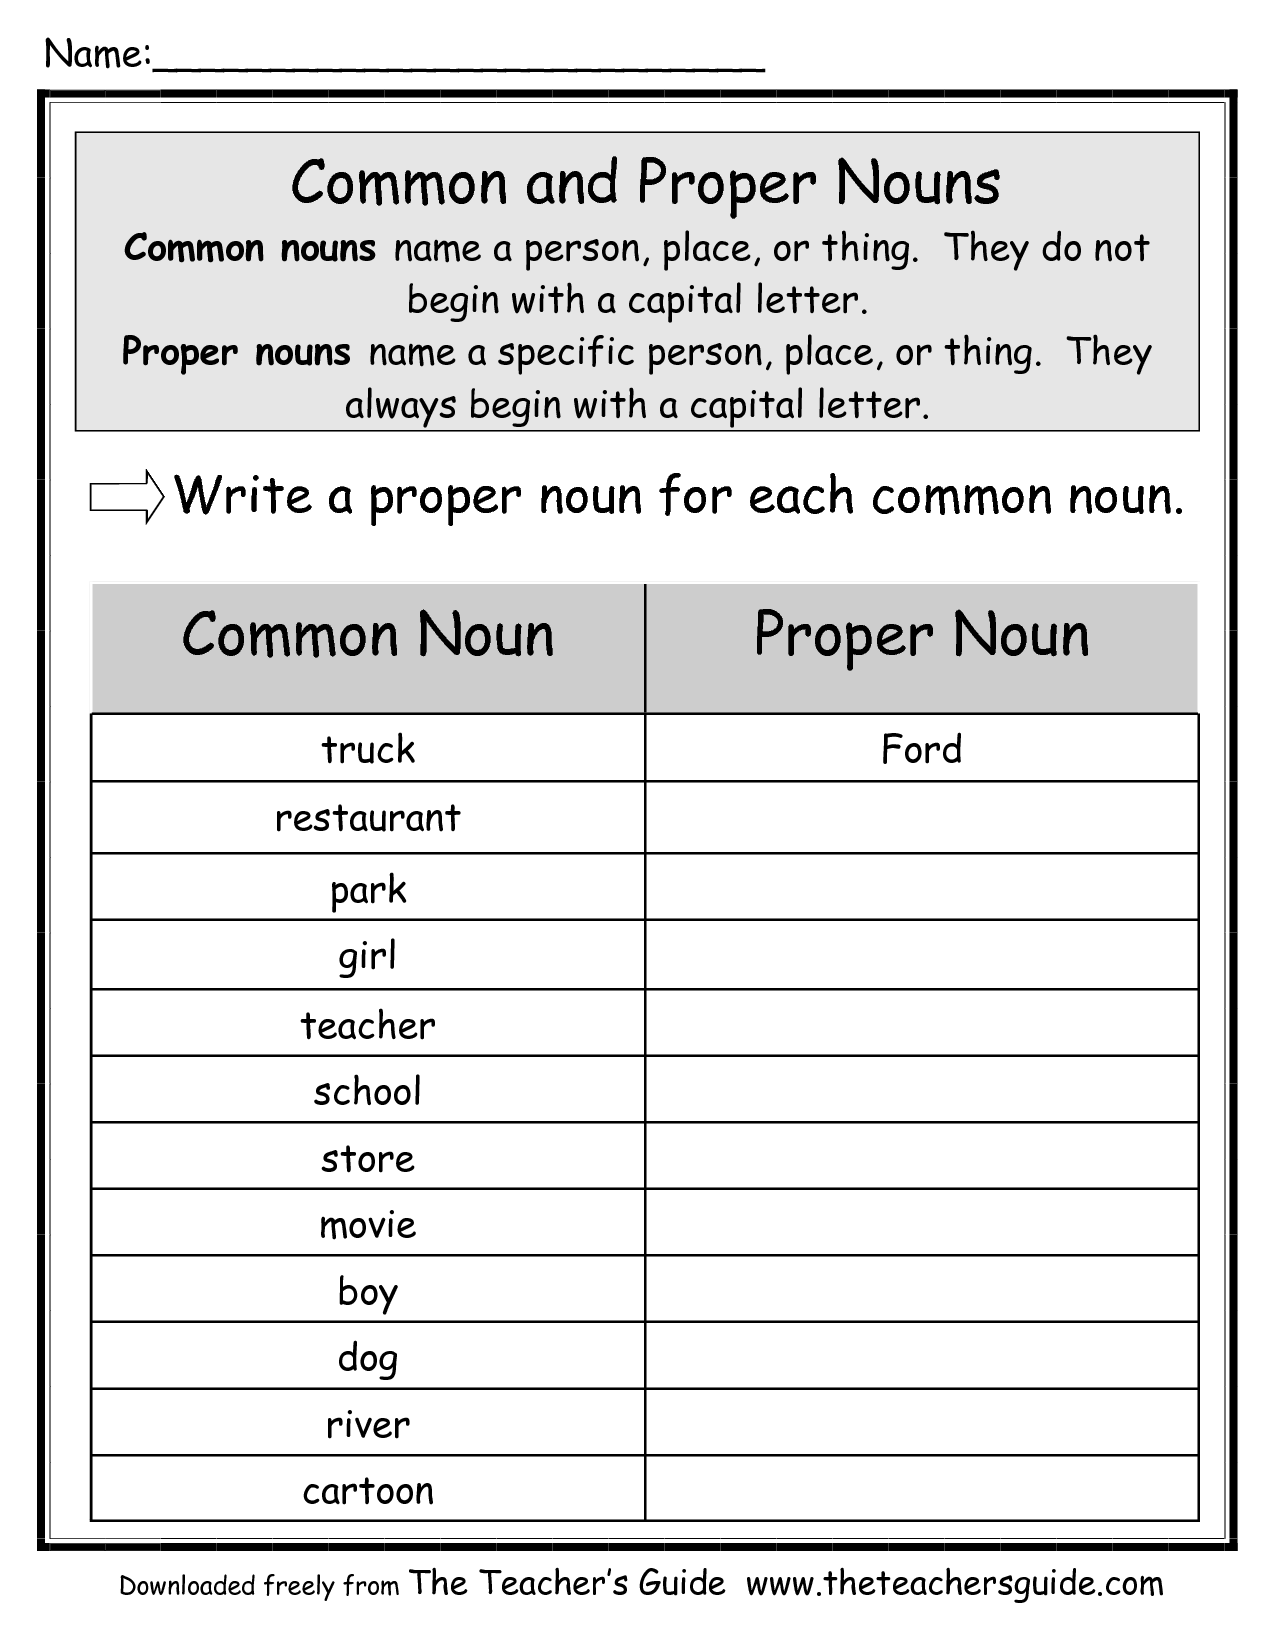 Common And Proper Noun Worksheet For Class 6